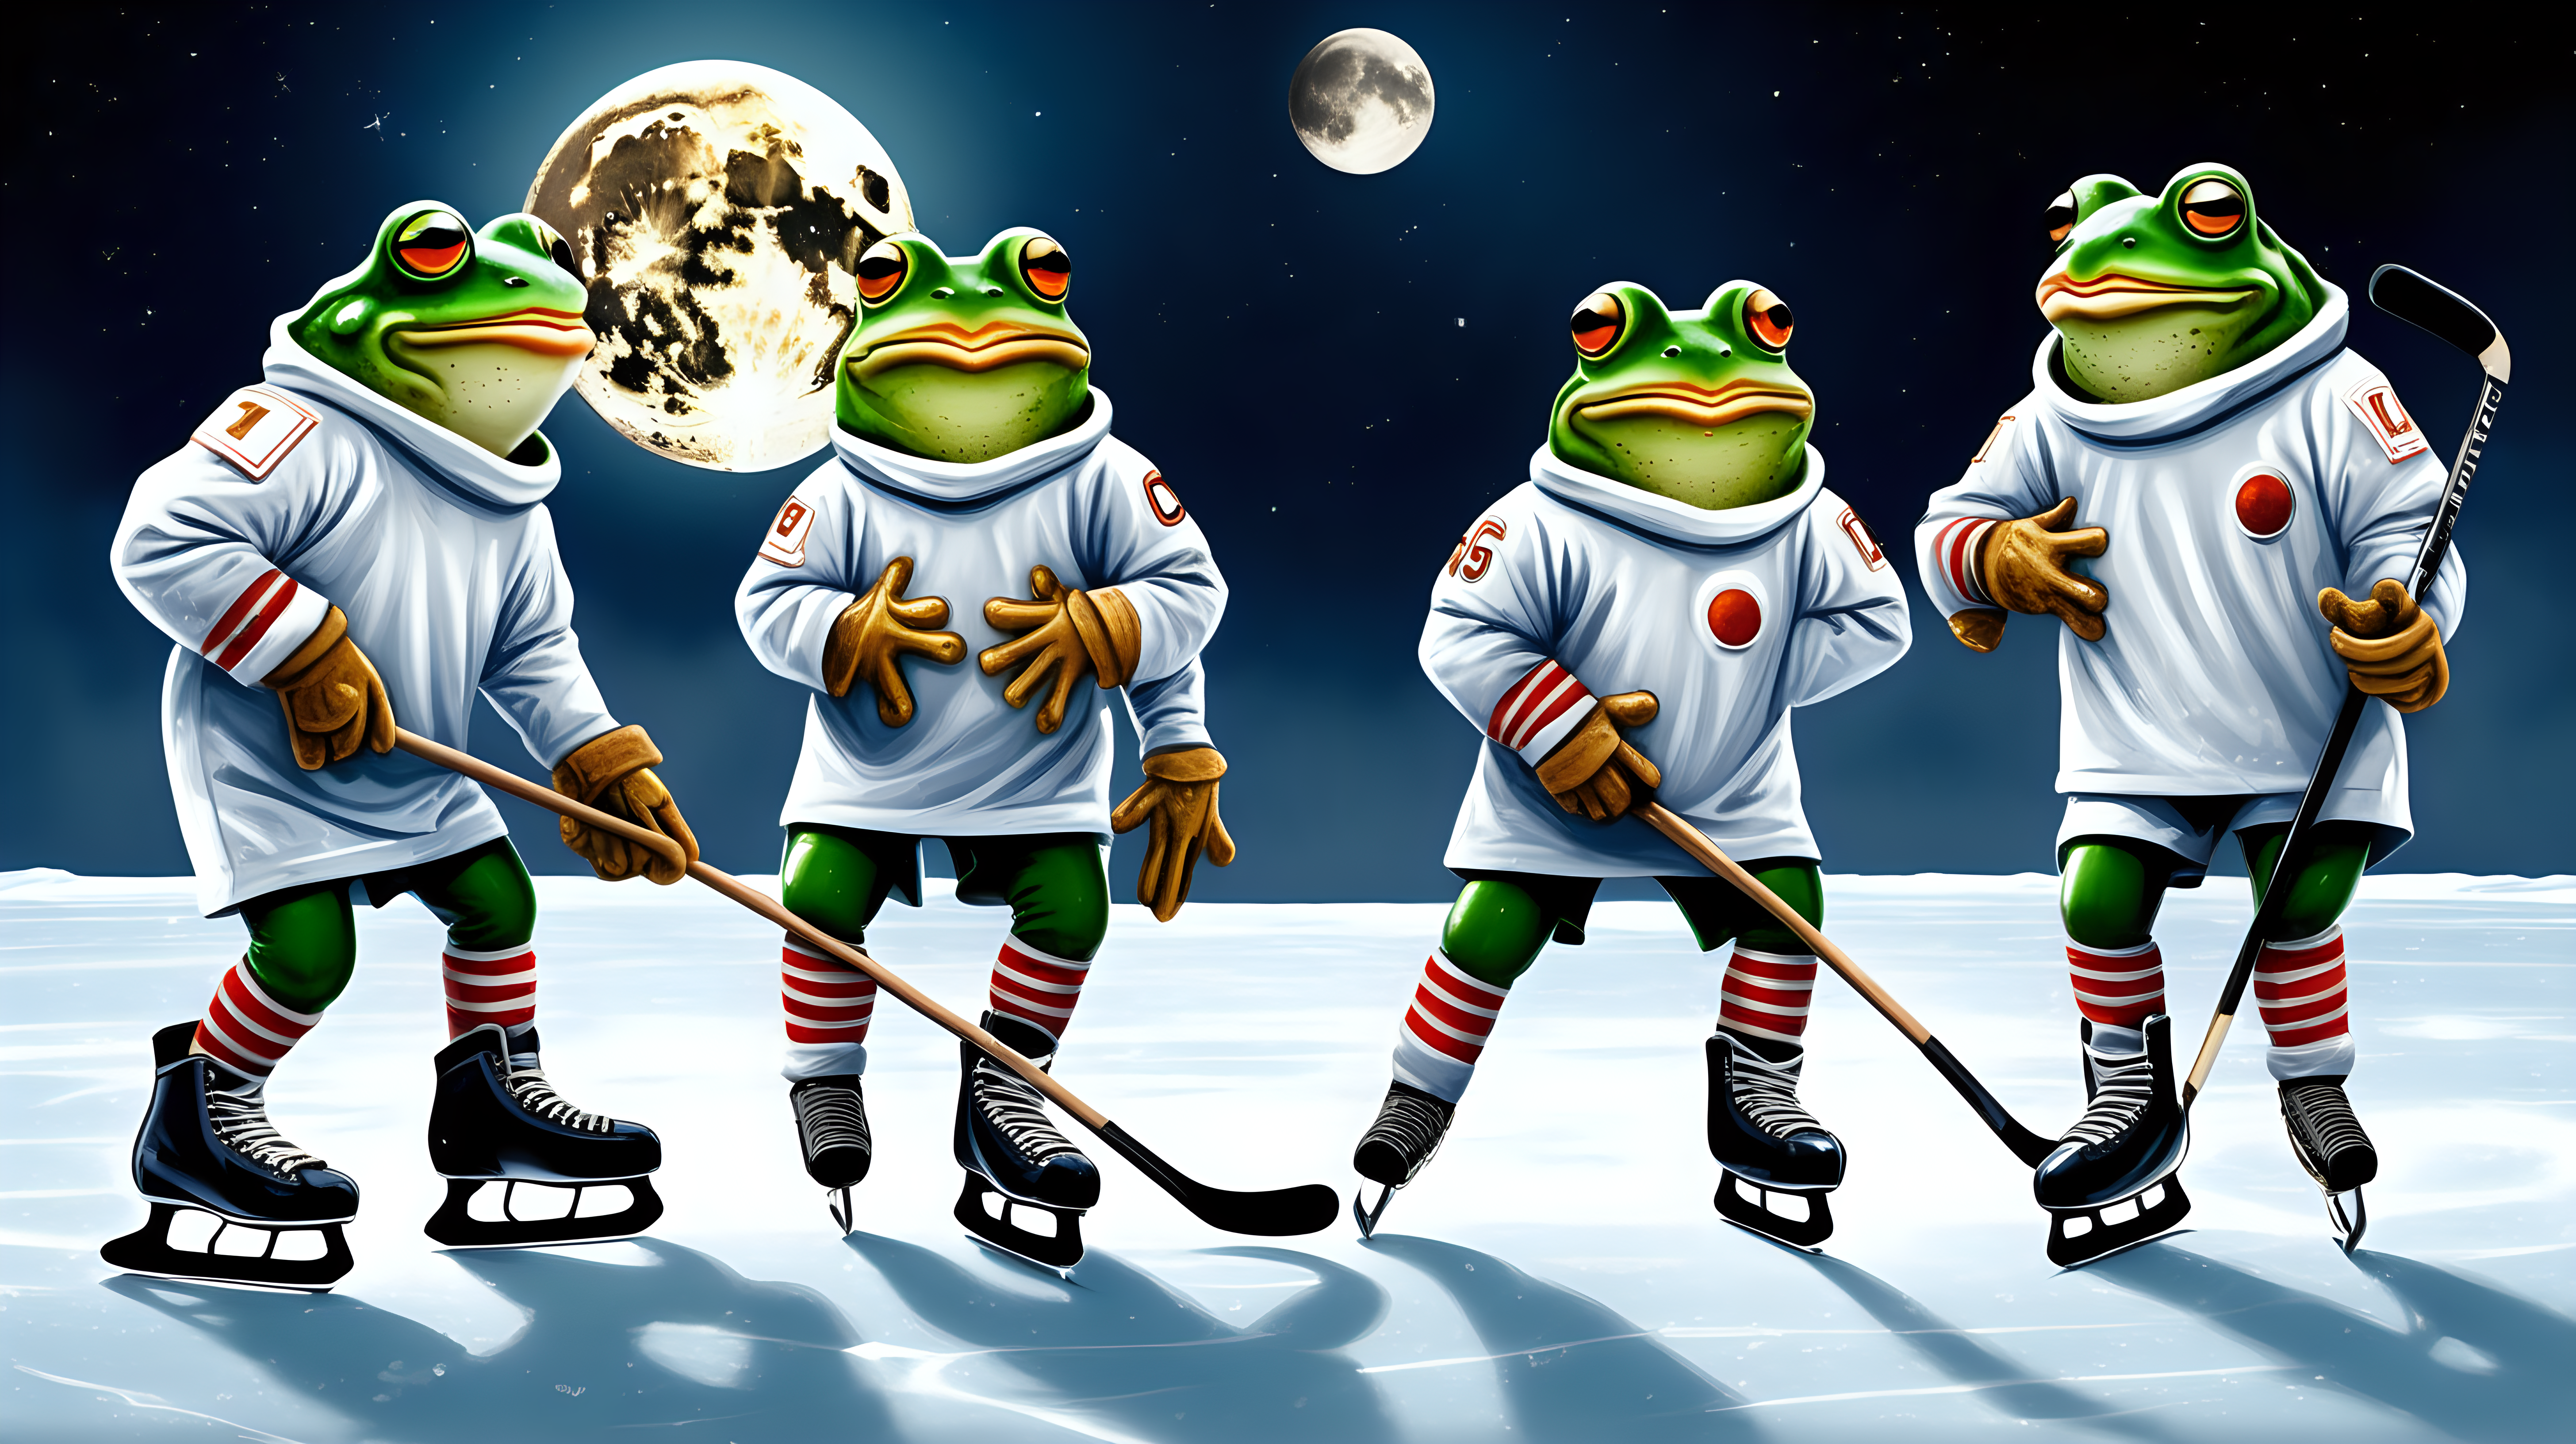 frogs in uniforms on ice skates playing hockey on the moon